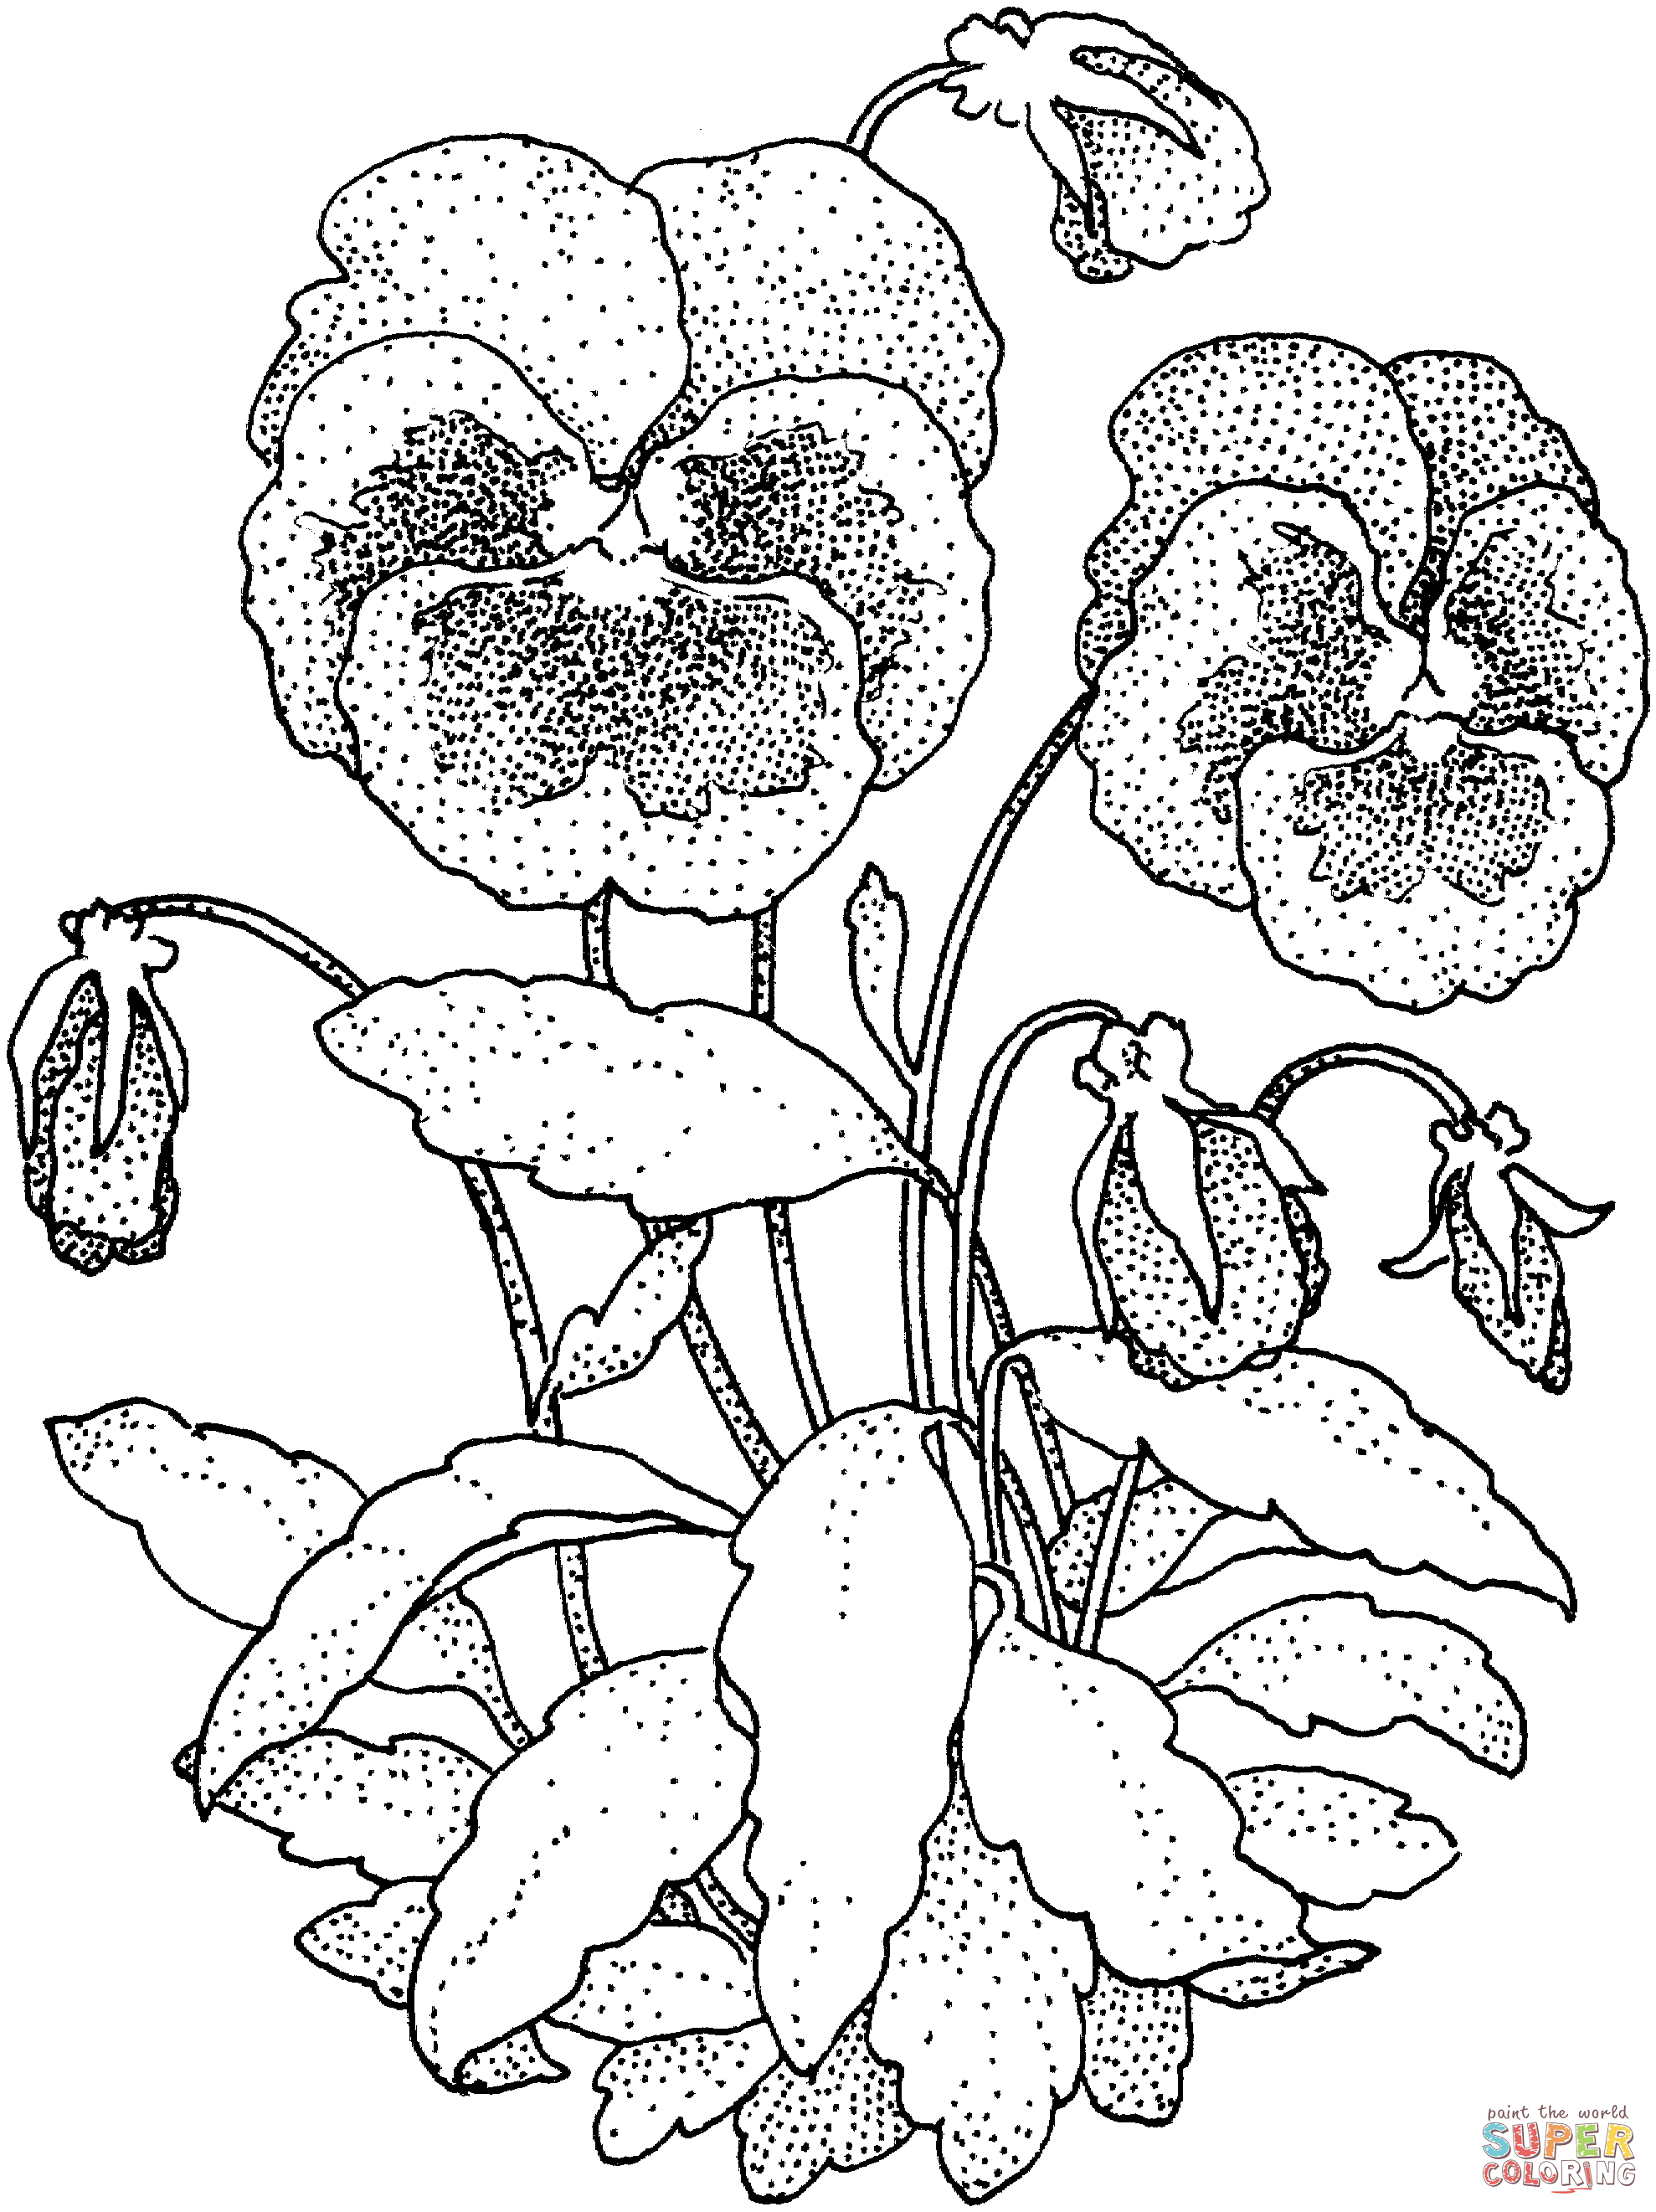 Violet coloring pages | Free Coloring Pages